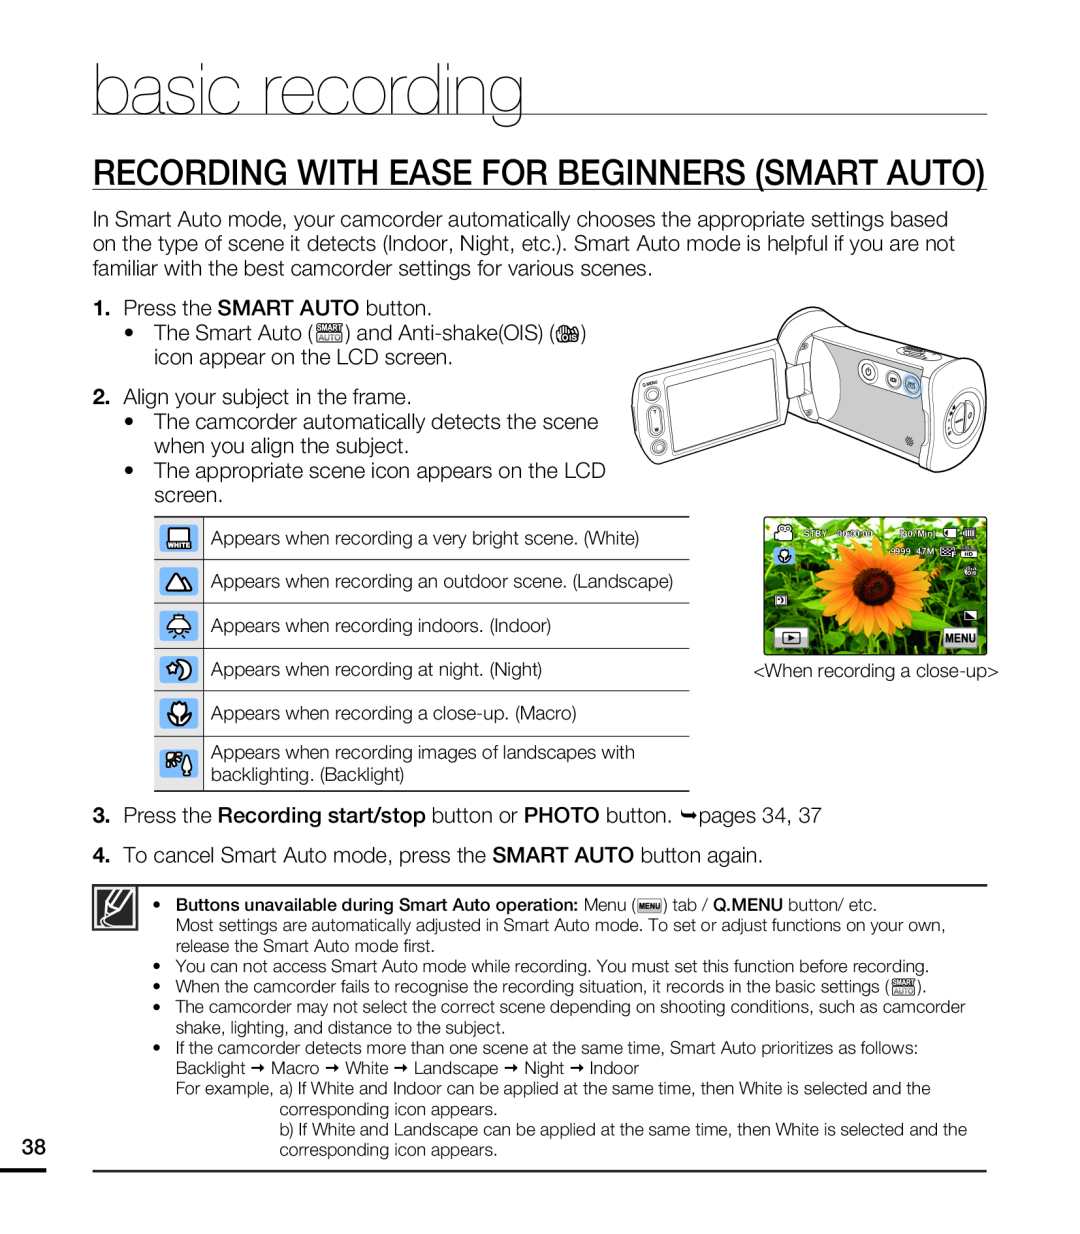 Samsung HMX-T10BP/XIL manual Recording With Ease For Beginners Smart Auto, basic recording, Press the SMART AUTO button 